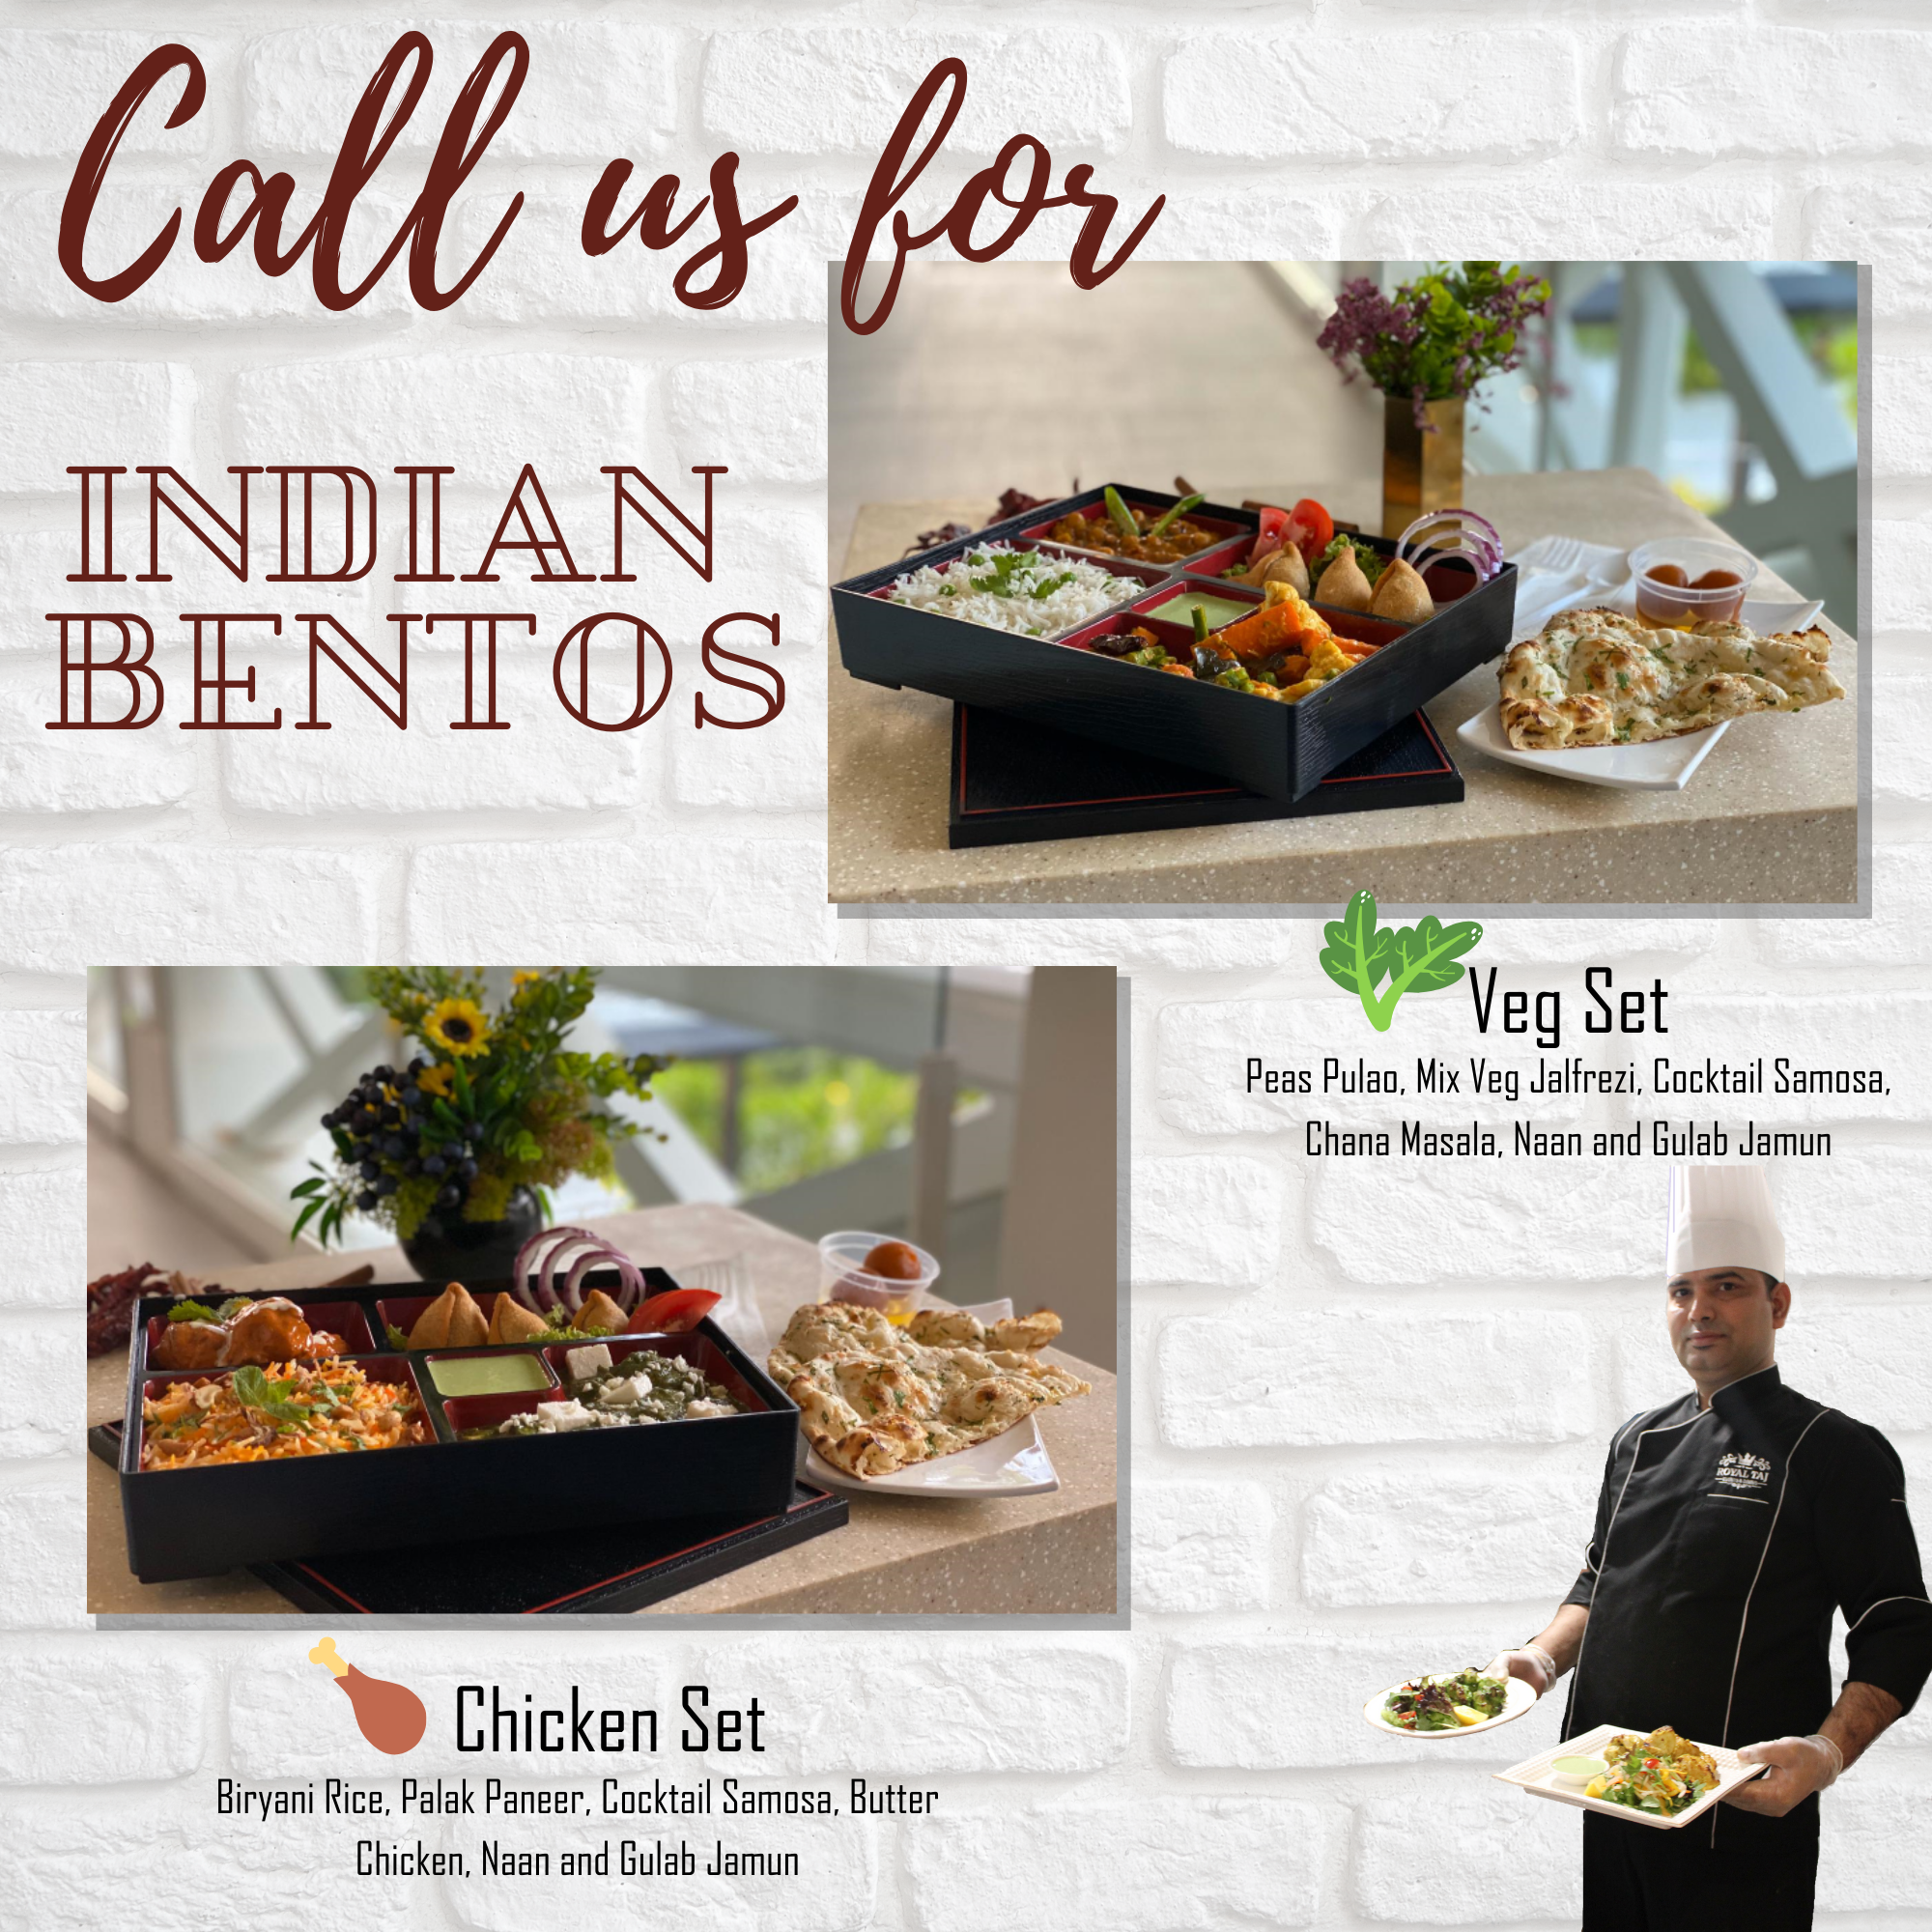 Corporate Bento Boxes :  Call us at 91185896 or 91157274 to discuss your requirements